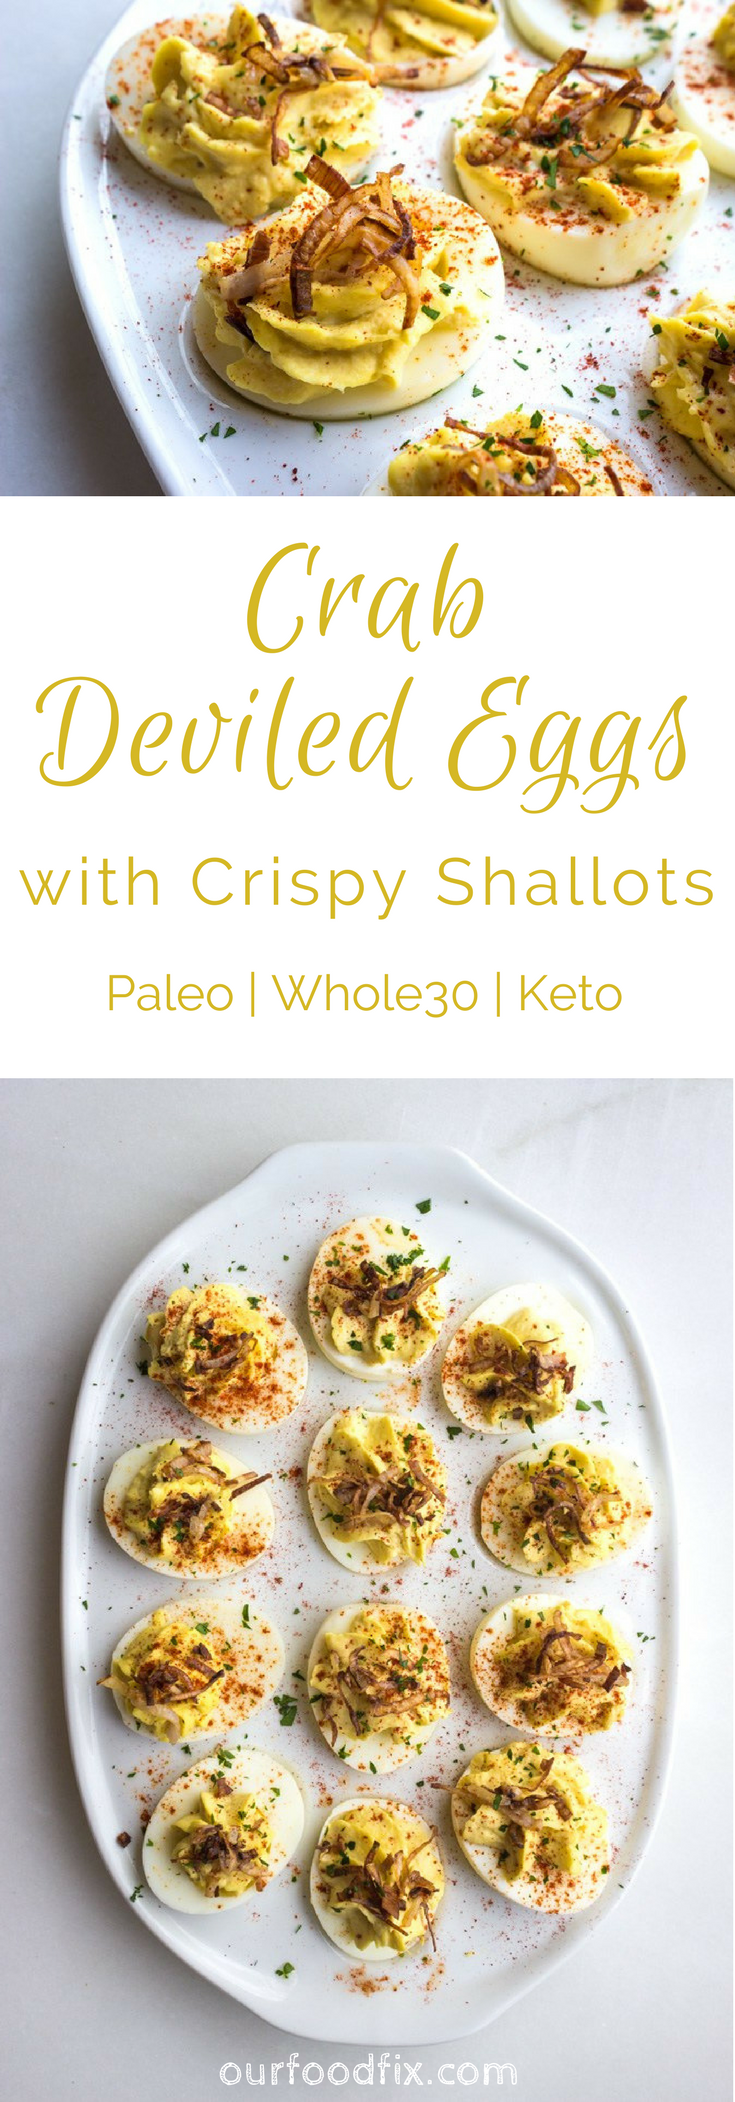 A seafood forward deviled egg made with clean ingredients and topped with crispy onion strings. Perfect for your spring parties or Easter gathering. #theWRlife #deviledeggs #easterrecipes | Easter dishes | Holiday recipes | Appetizers | Snacks | Bites | Deviled eggs | Party food | Seafood recipes | Paleo recipes | Whole30 recipes | Keto recipes | Egg recipes 